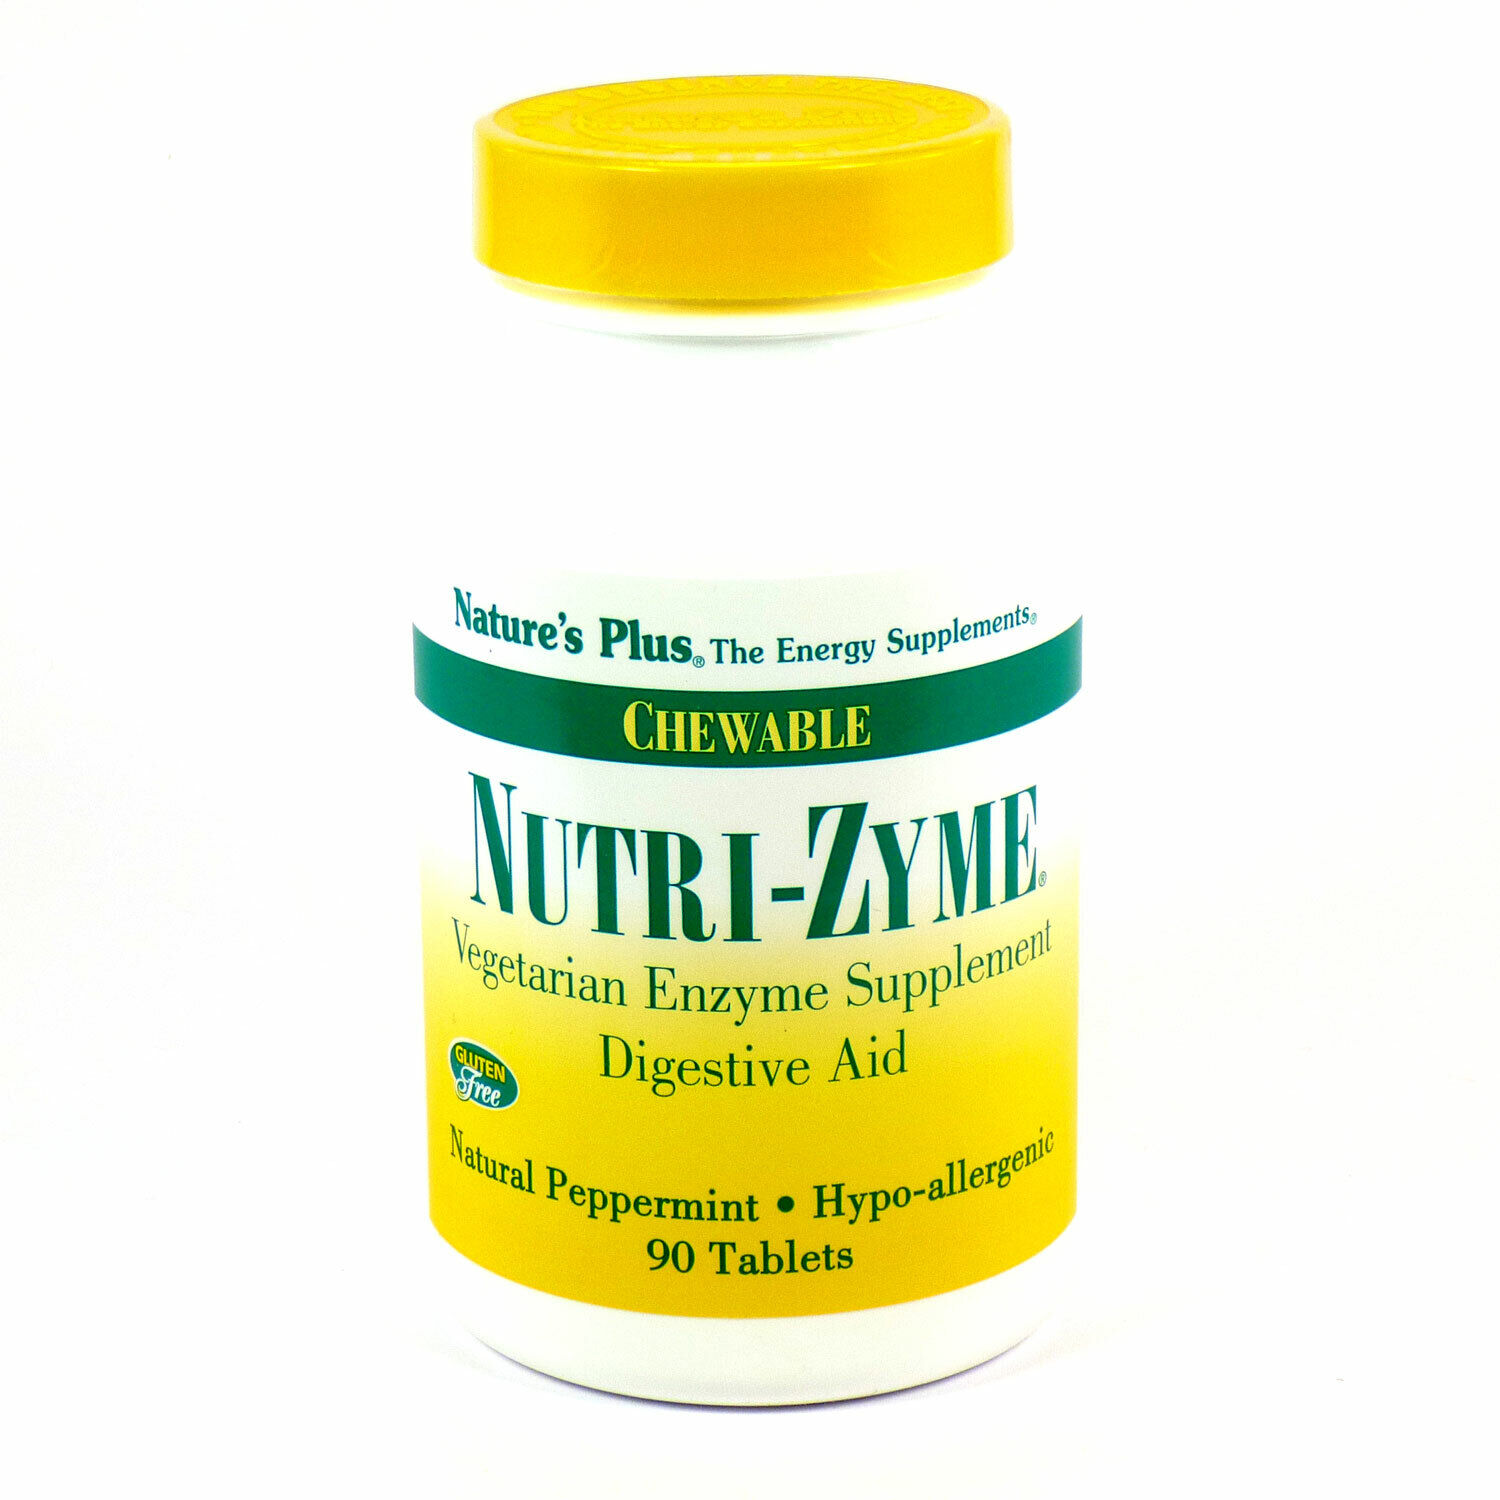 Nutri-Zyme Chewable Digestive Aid by Nature's Plus 90 Chewable Tablets